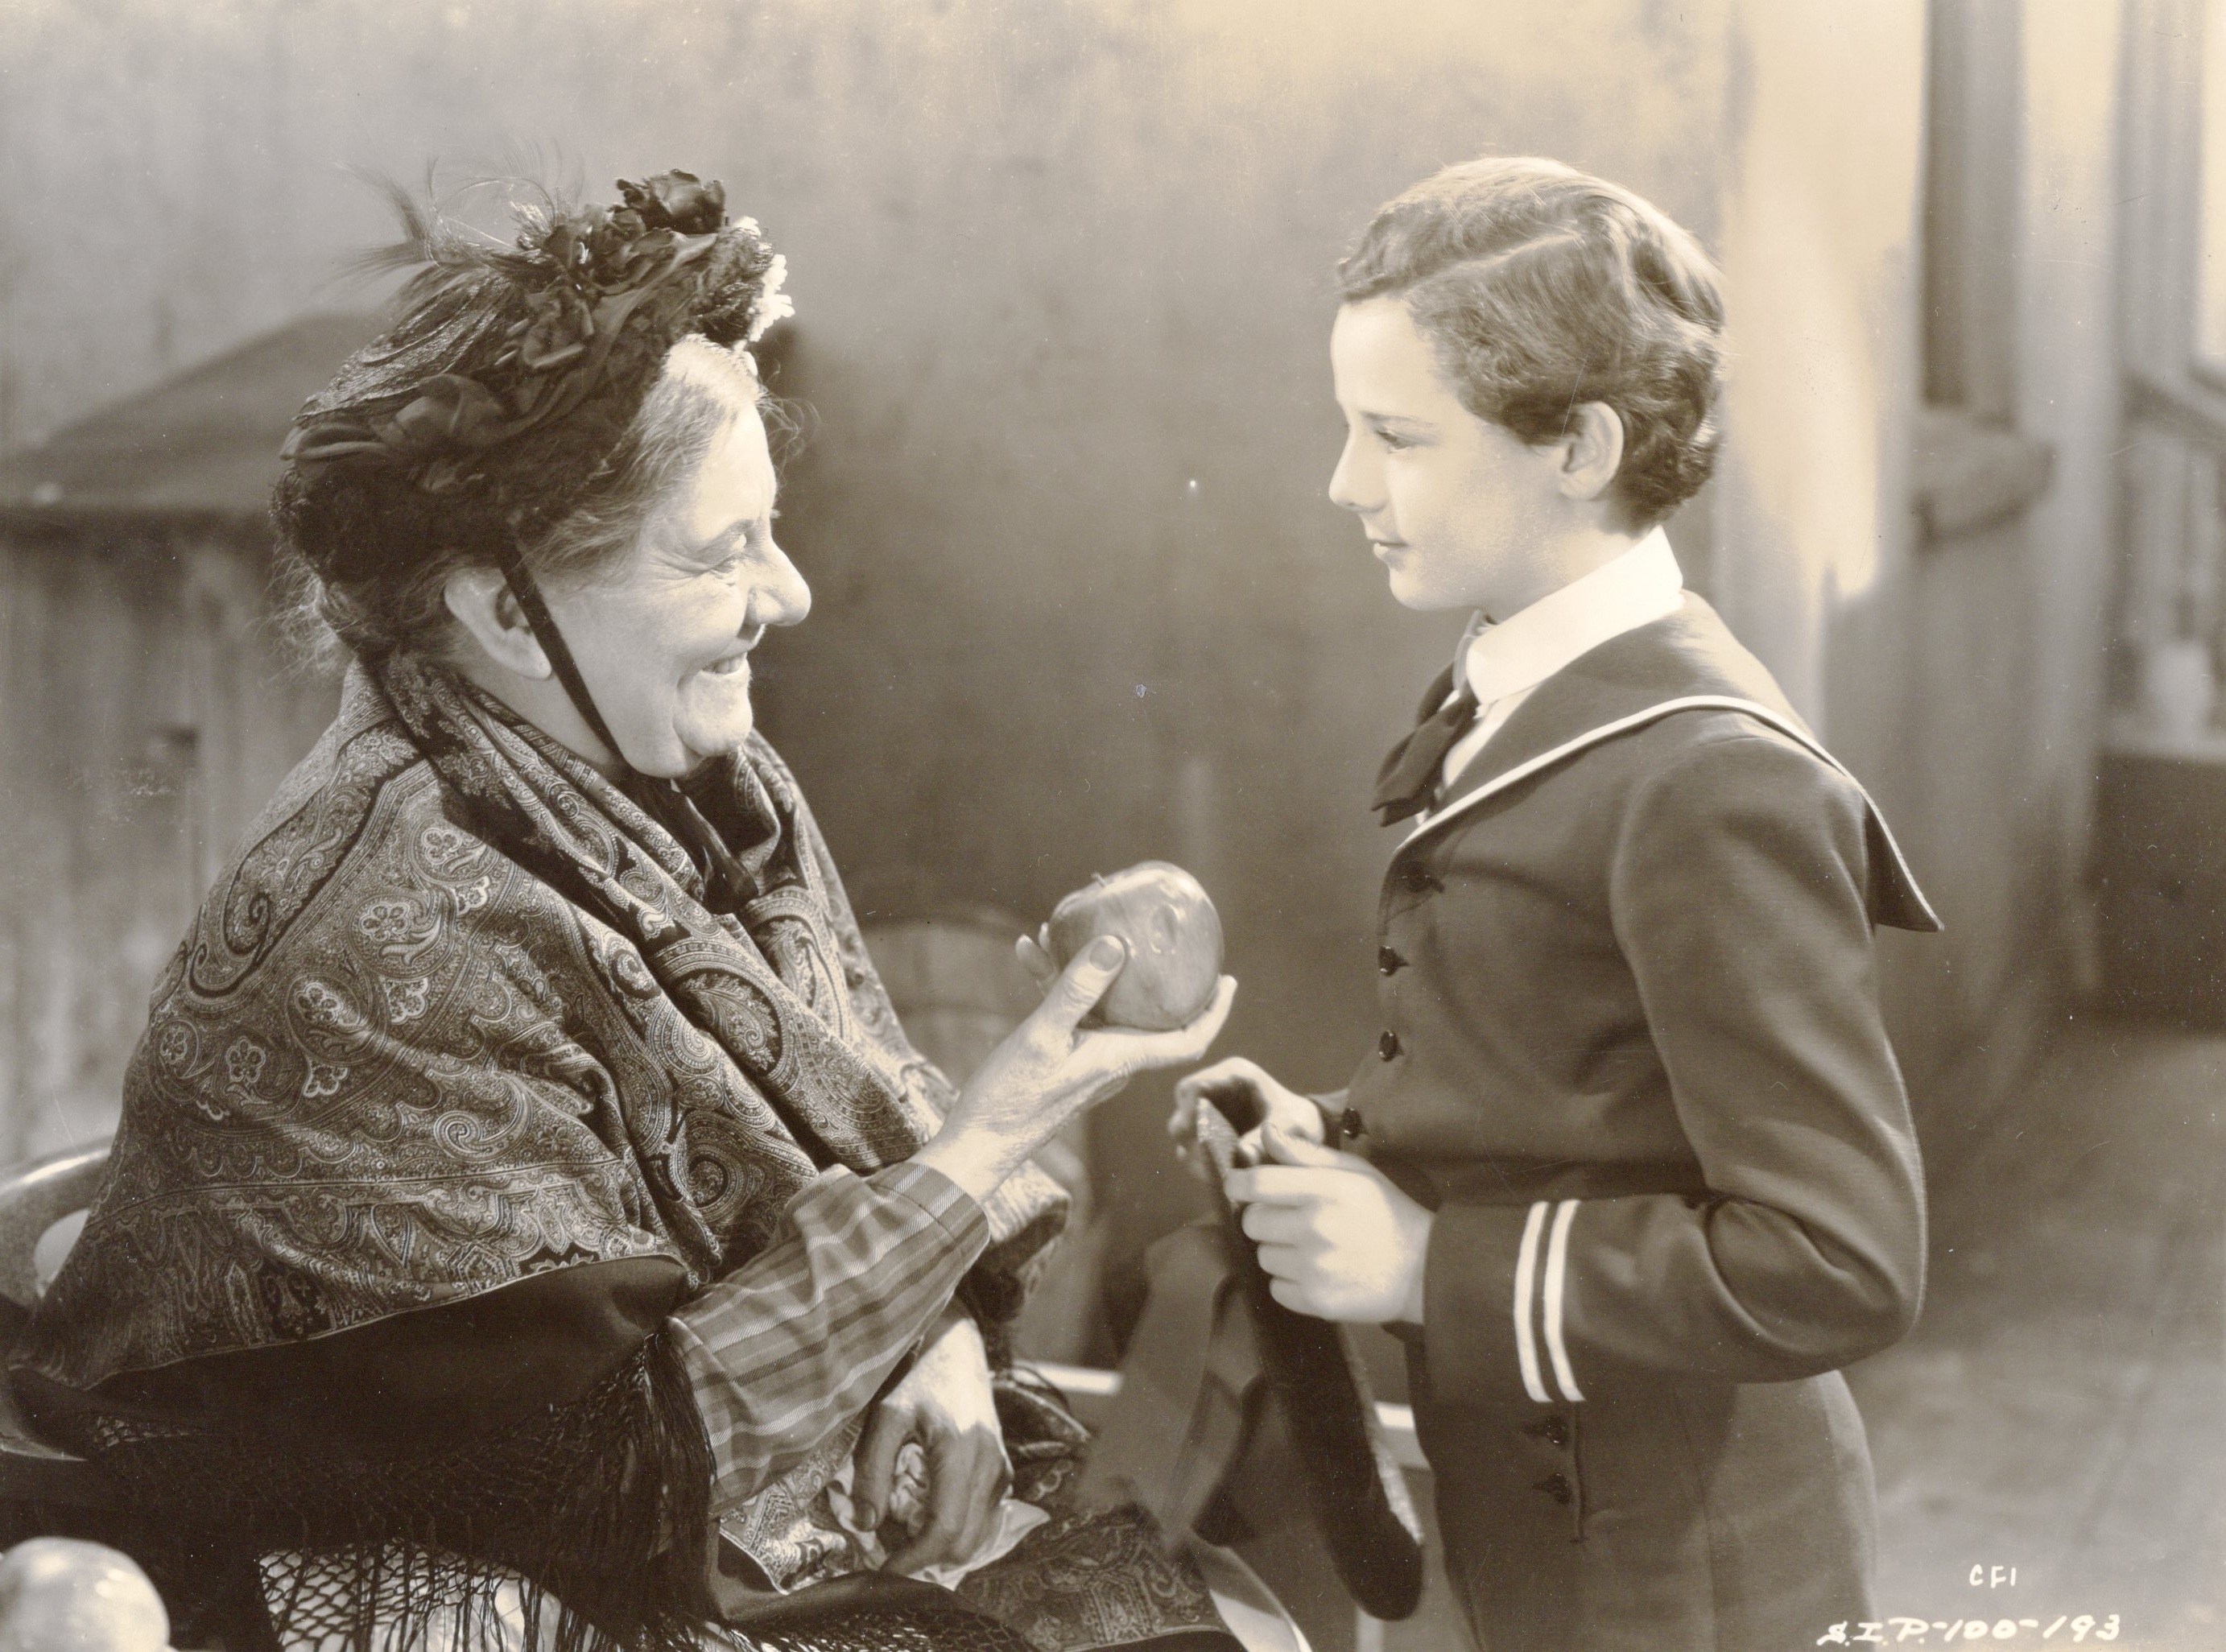 A Freddie Bartholomew sailor jacket from Little Lord Fauntleroy - Image 3 of 3